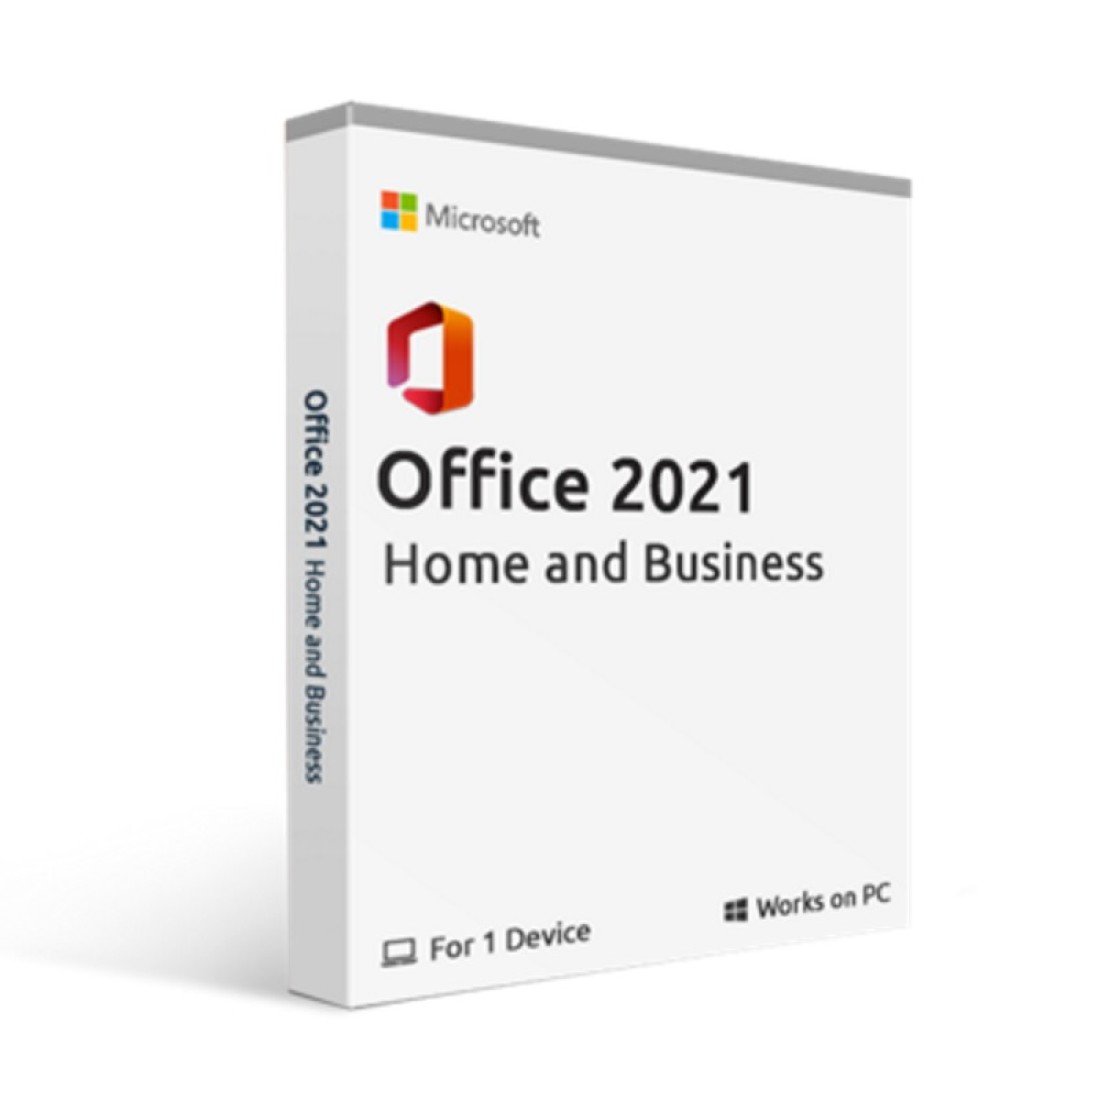 Home business 2021. Microsoft Office 2021 Home and Business для Mac. Office 2021 professional Plus. Office 2021 Home and Business Mac. Коробка Office 2021 Home and Business.